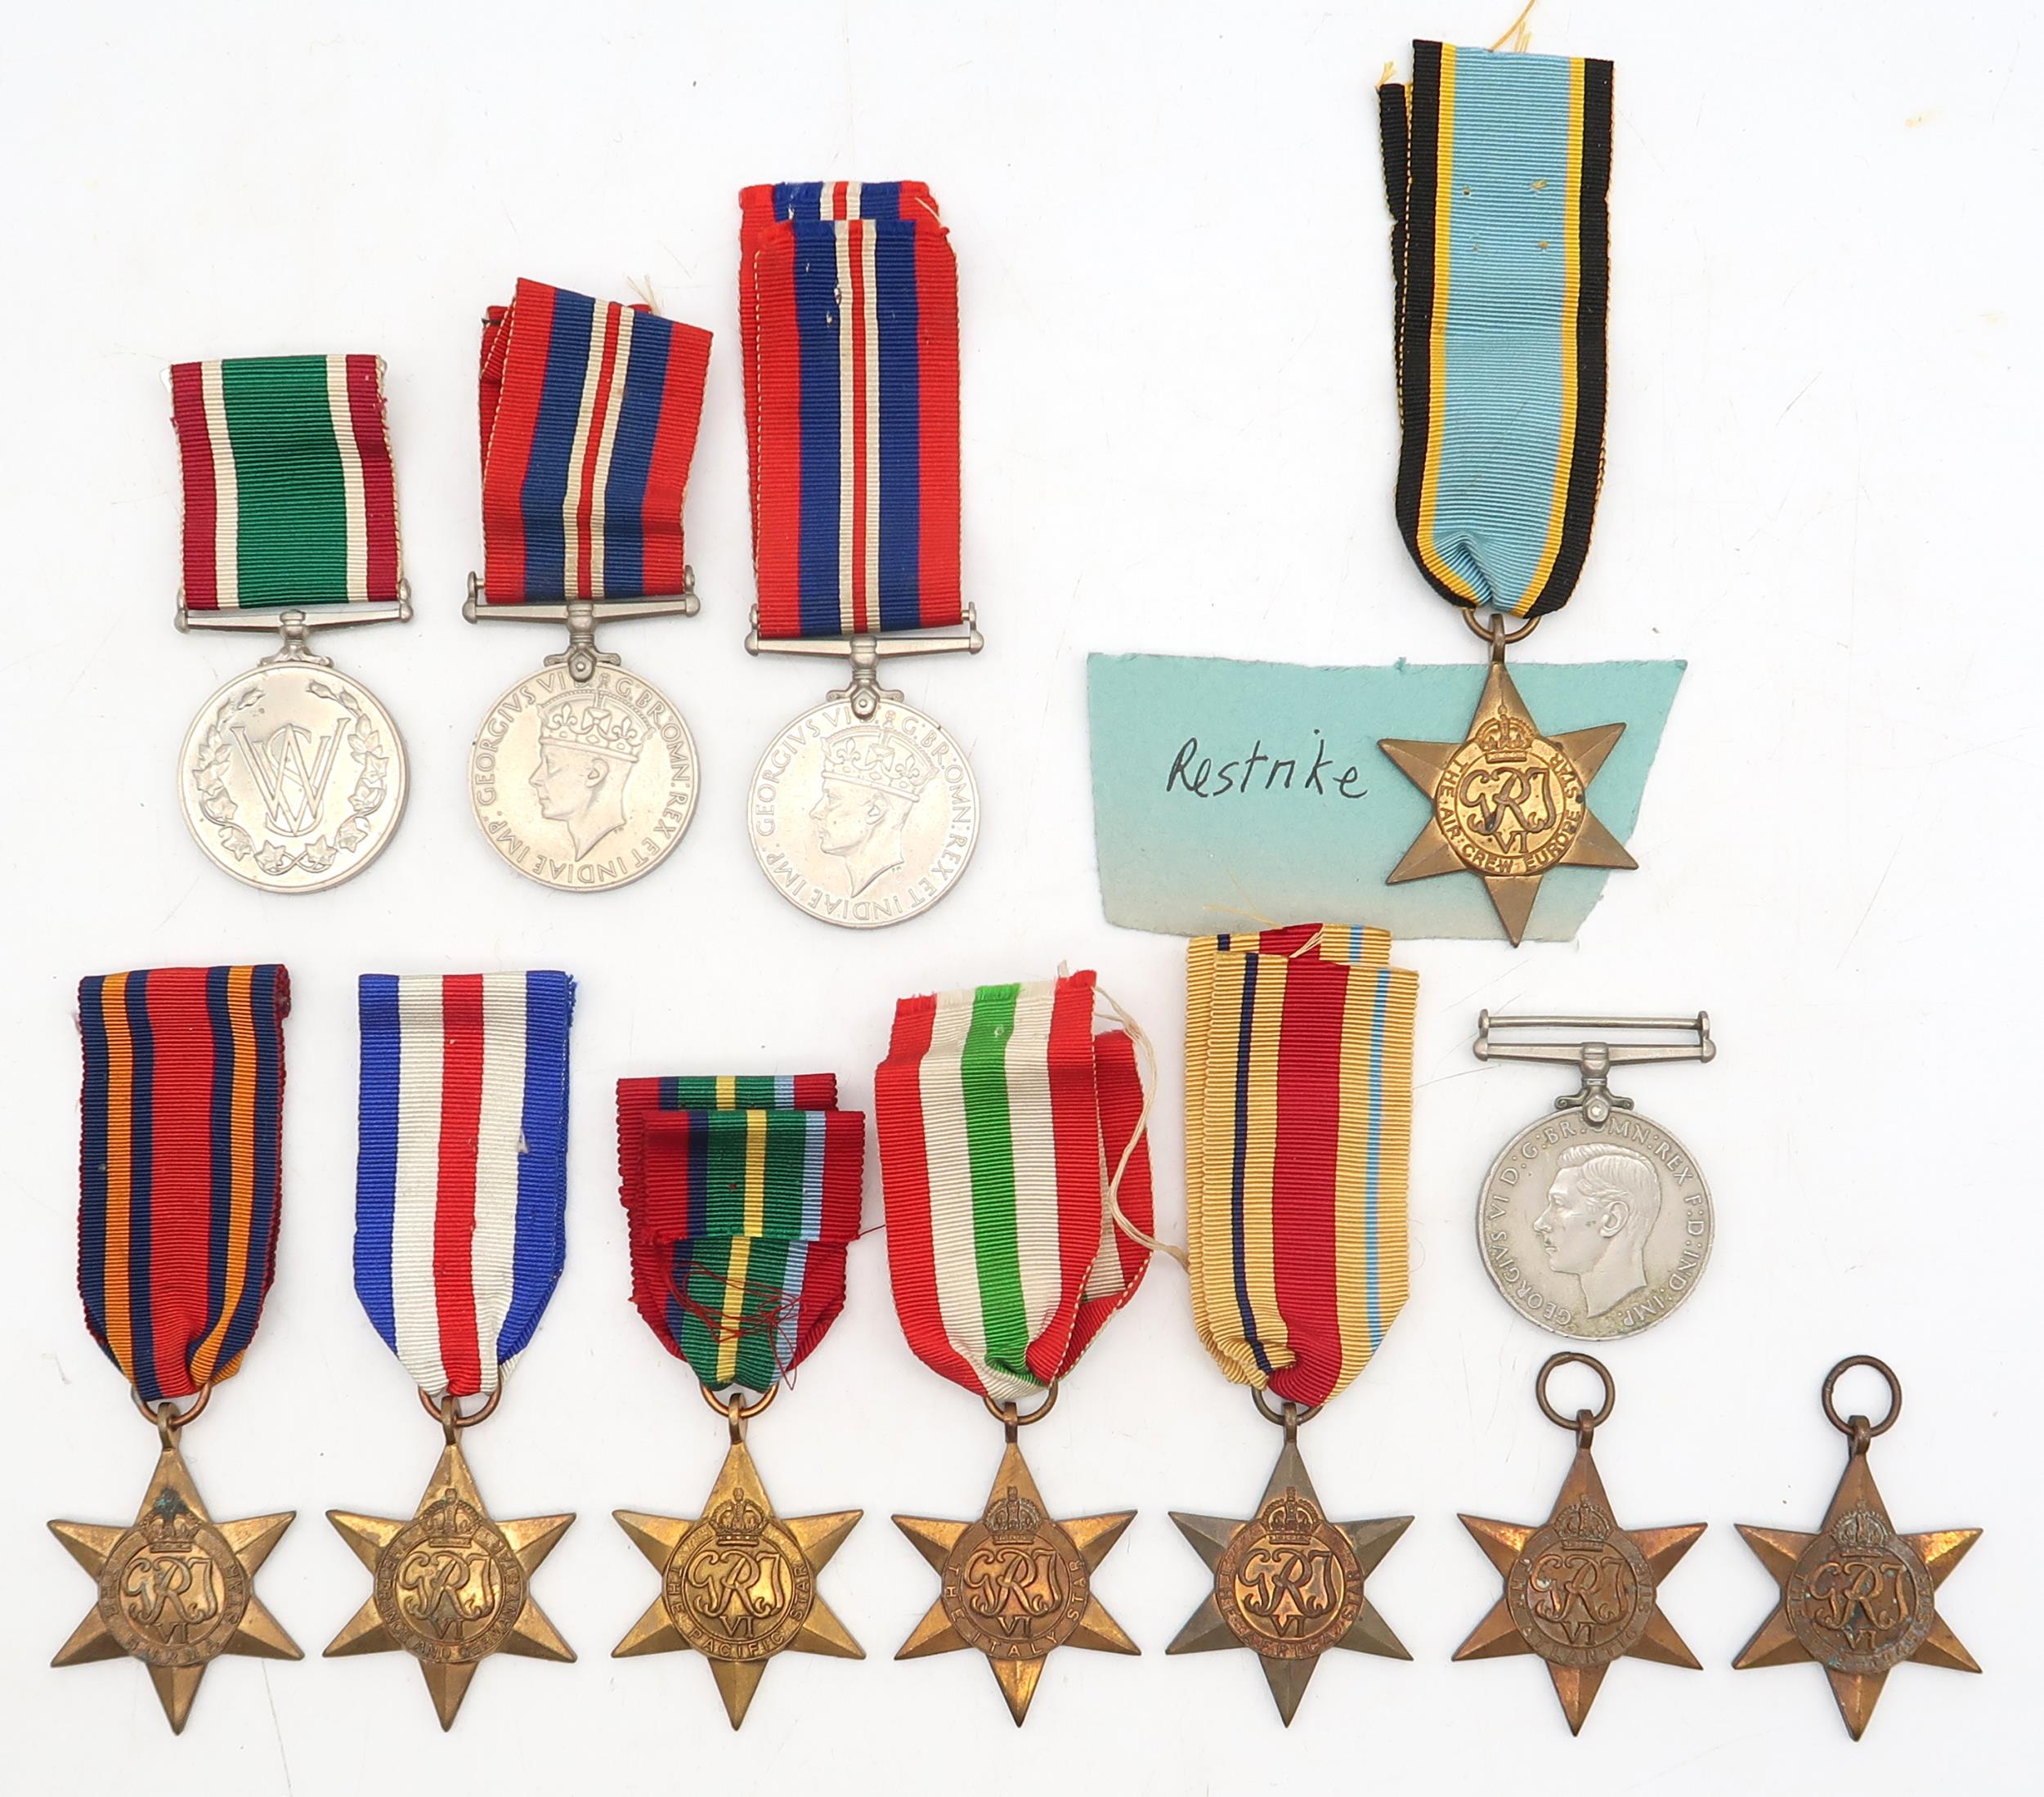 WW2 campaign medals, comprising Africa Star, Italy Star, Atlantic Star, Pacific Star, France and